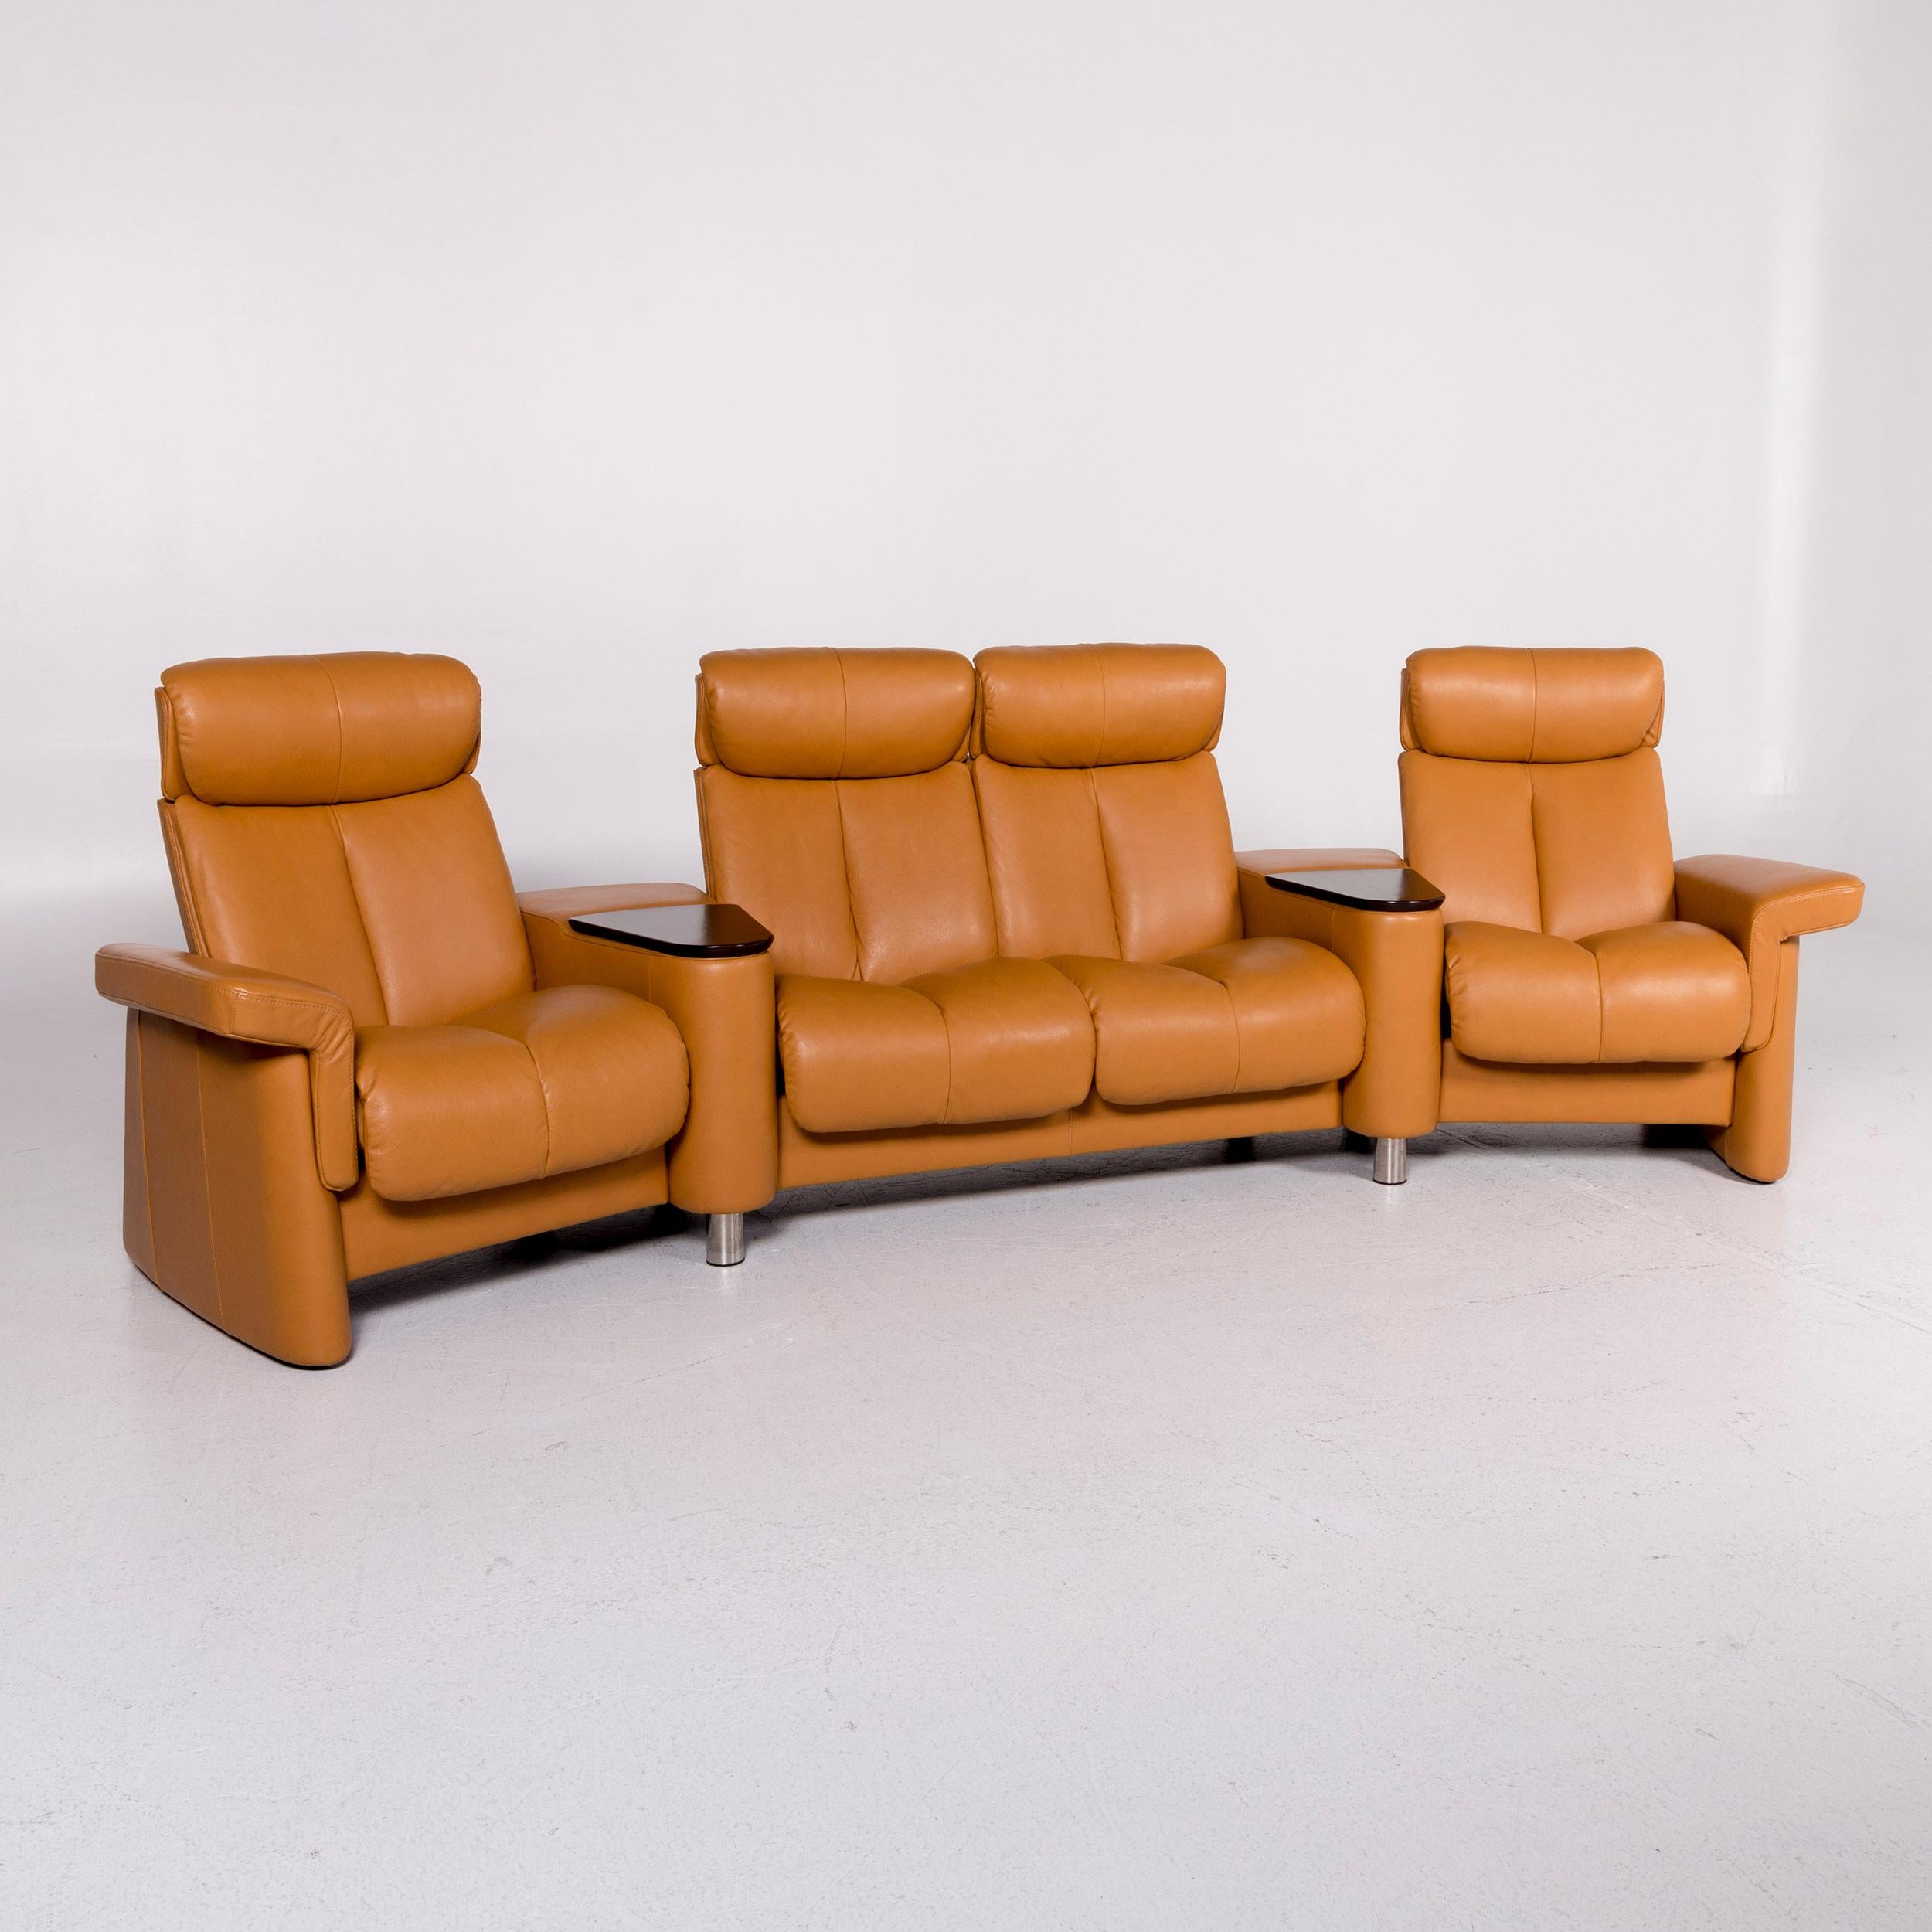 We bring to you a stressless legend leather corner sofa mustard yellow ocher sofa four-seat.
 
Product measurements in centimeters:
 
Depth 107
Width 322
Height 101
Seat-height 48
Rest-height 60
Seat-depth 54
Seat-width 55
Back-height